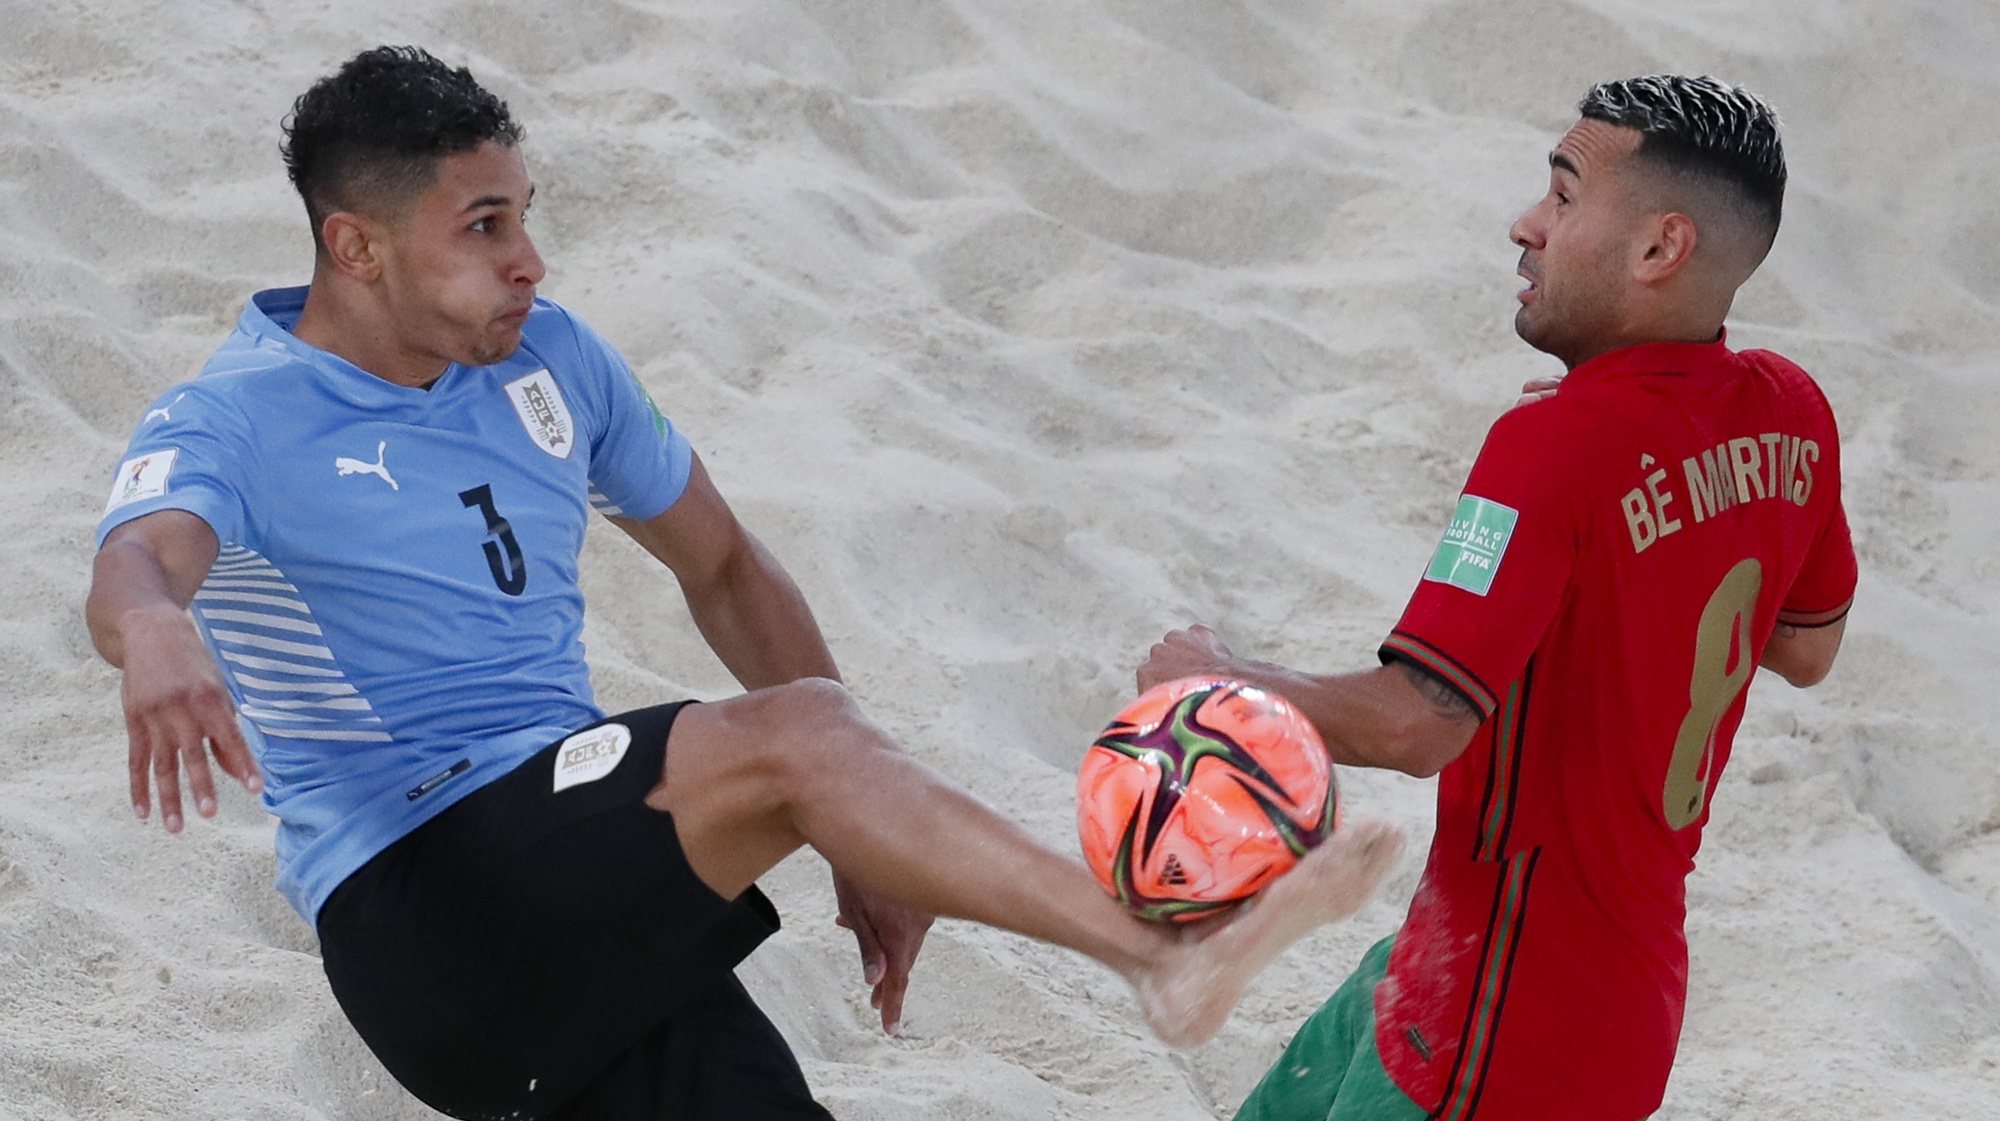 epa09427902 Matias Guerrero (L) of Uruguay in action against Be Martins of Portugal during the FIFA Beach Soccer World Cup 2021 match between Portugal and Uruguay at Luzhniki Beach Soccer Stadium in Moscow, Russia 24 August 2021.  EPA/YURI KOCHETKOV